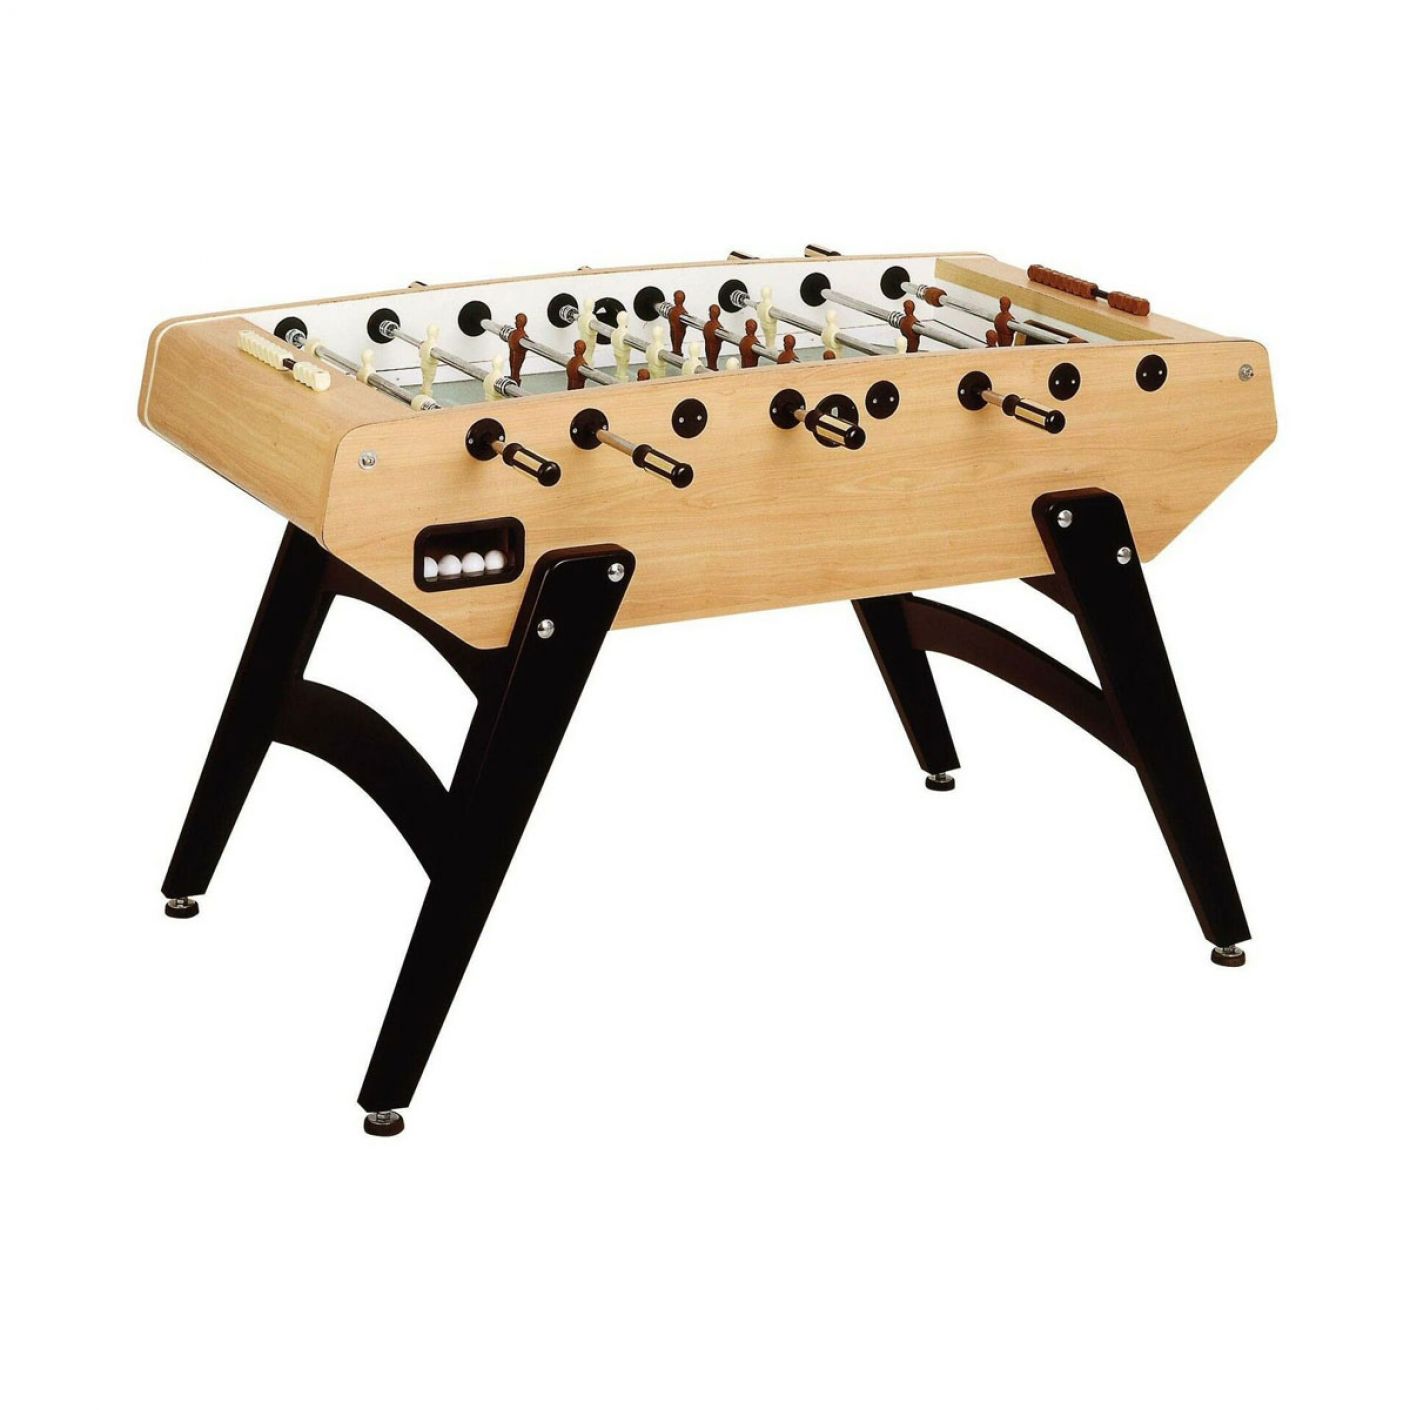 Garlando Table Football G-5000 with retracting rods